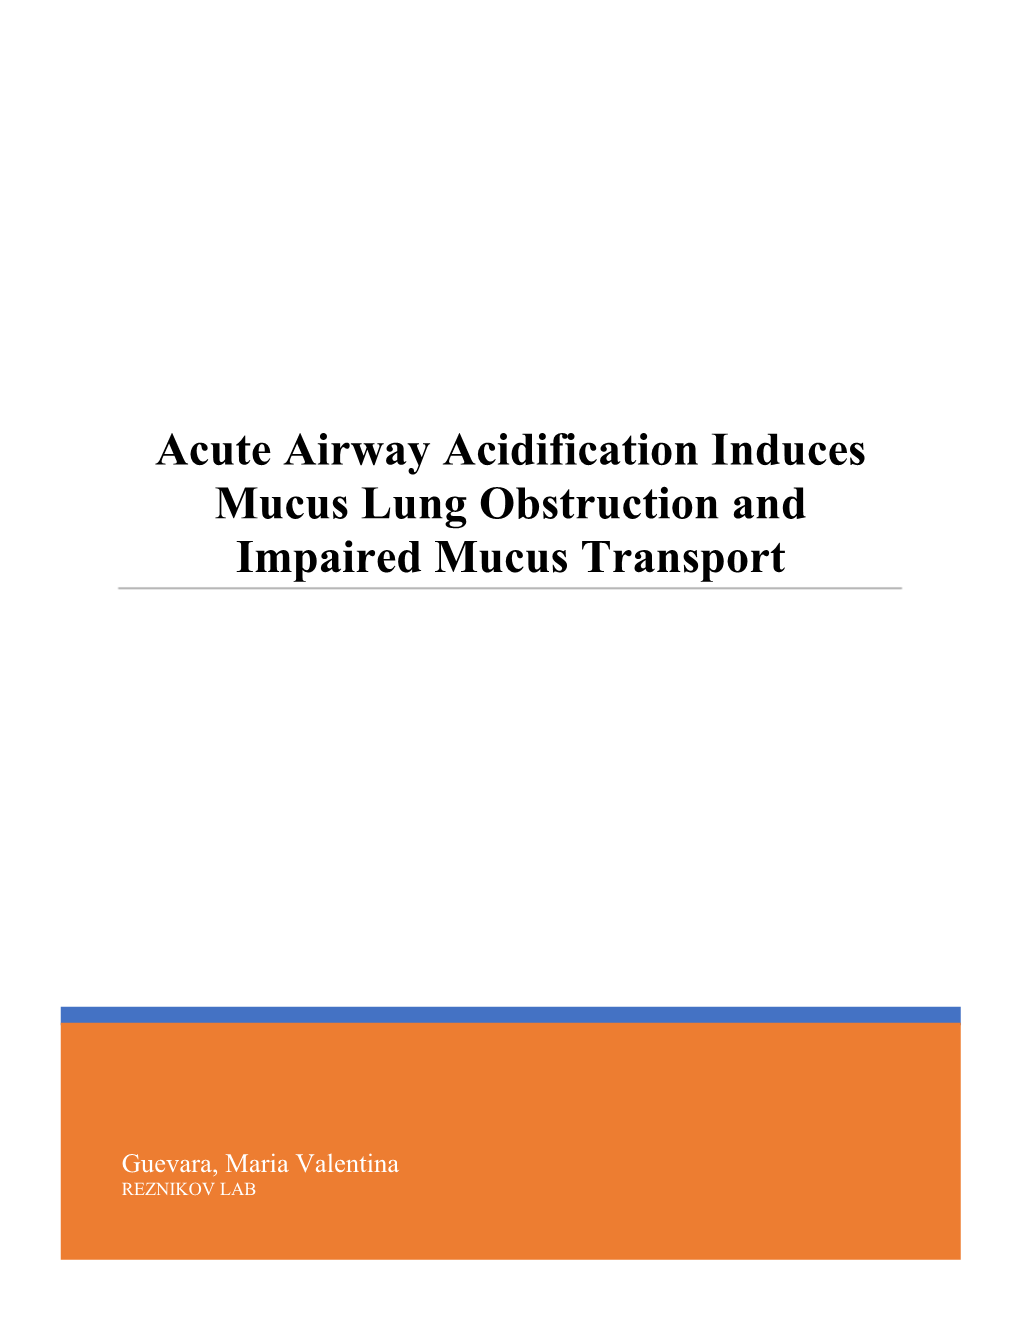 Acute Airway Acidification Induces Mucus Lung Obstruction and Impaired Mucus Transport